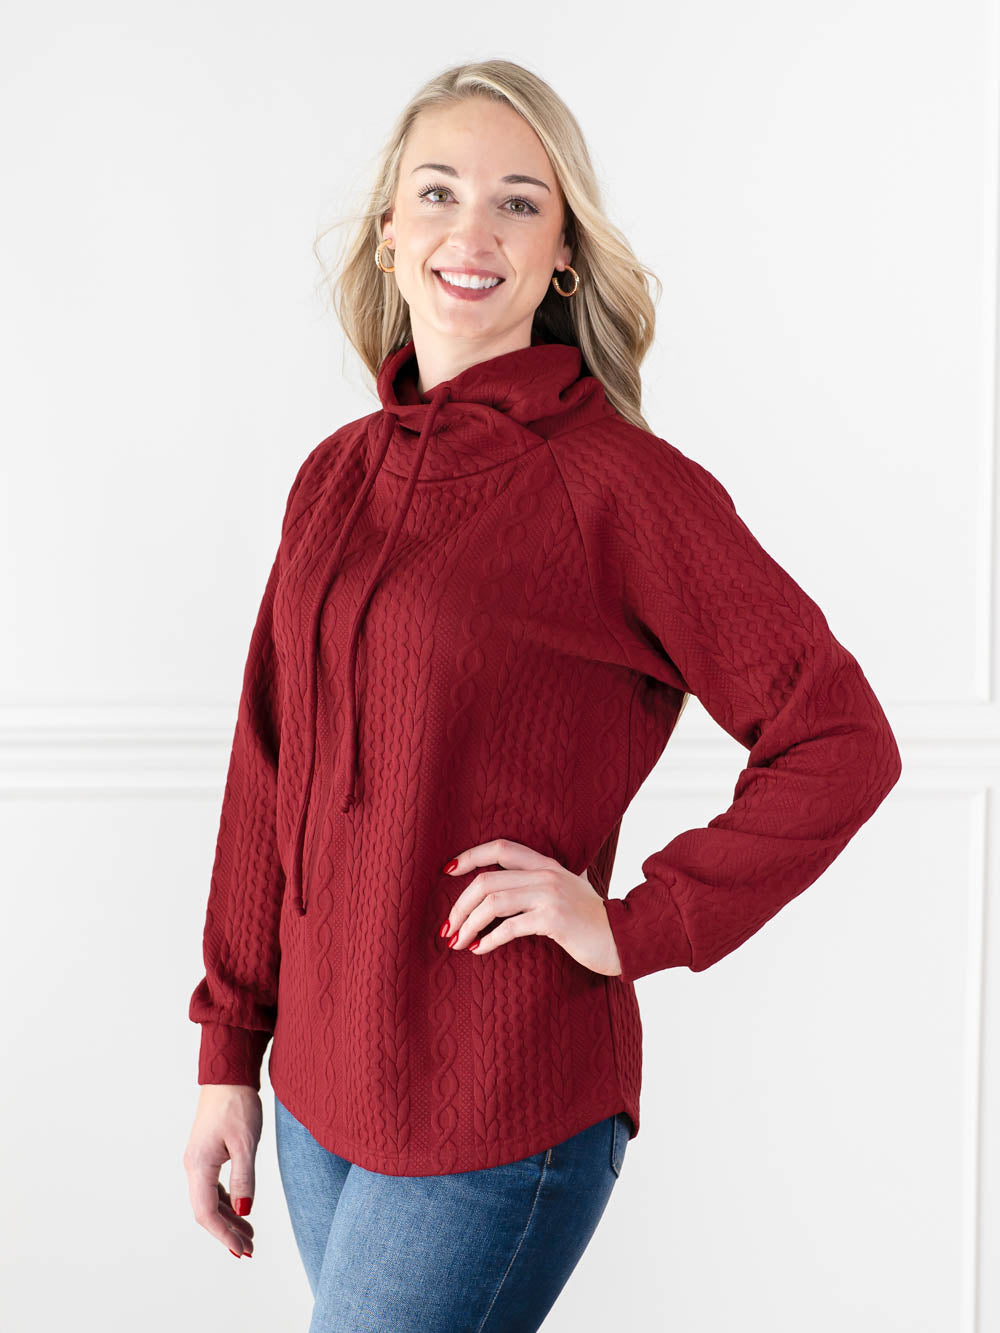 Cable Knit Sweatshirt for Tall Ladies